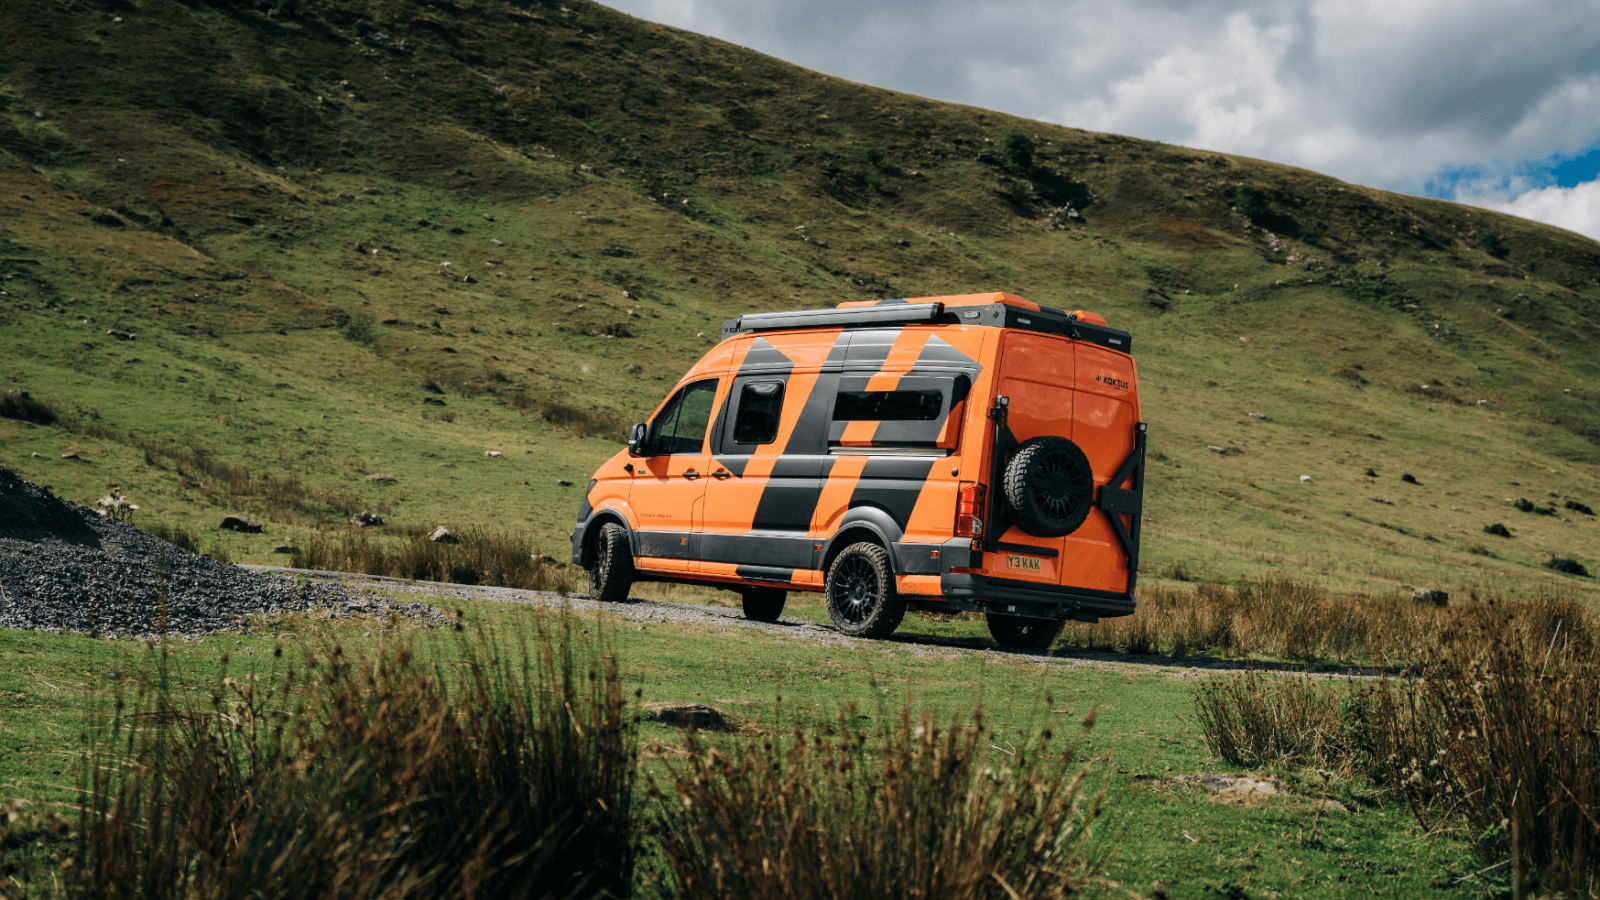 An orange van with reflective stripes parked on a gravel road, surrounded by green grassy hills under a brand design-inspired cloudy sky.